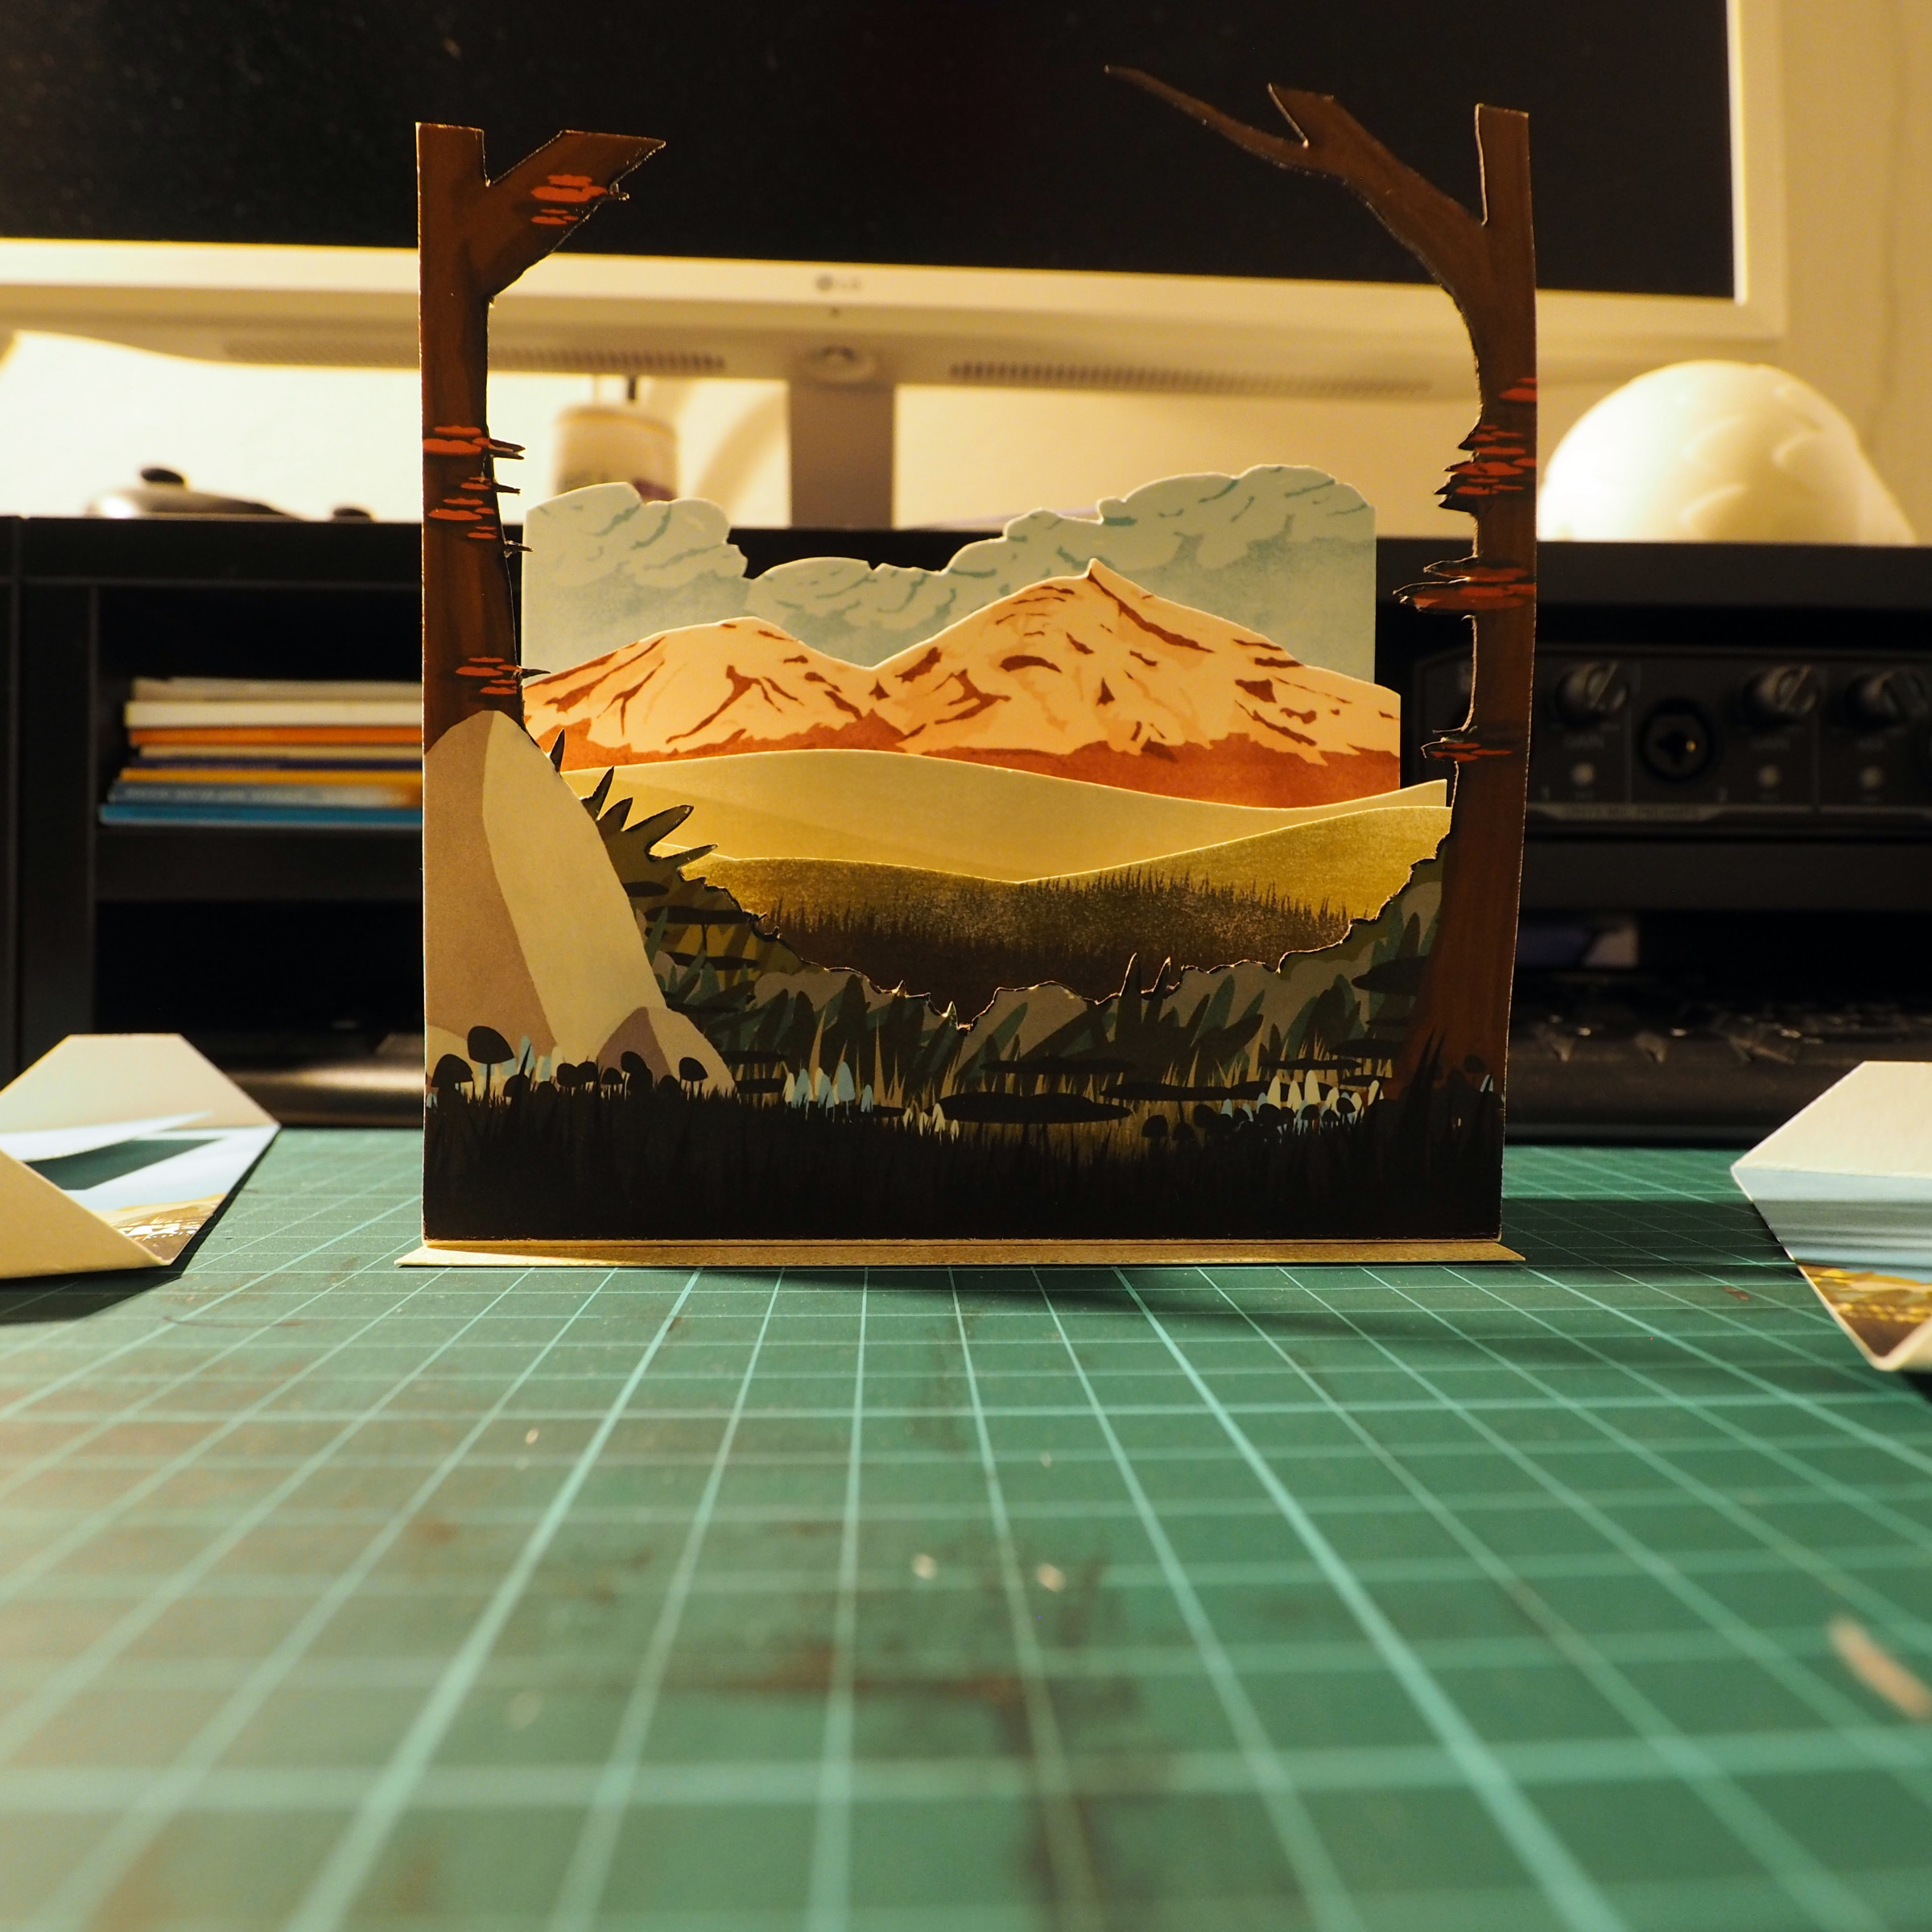 Cutting and assembling the diorama.